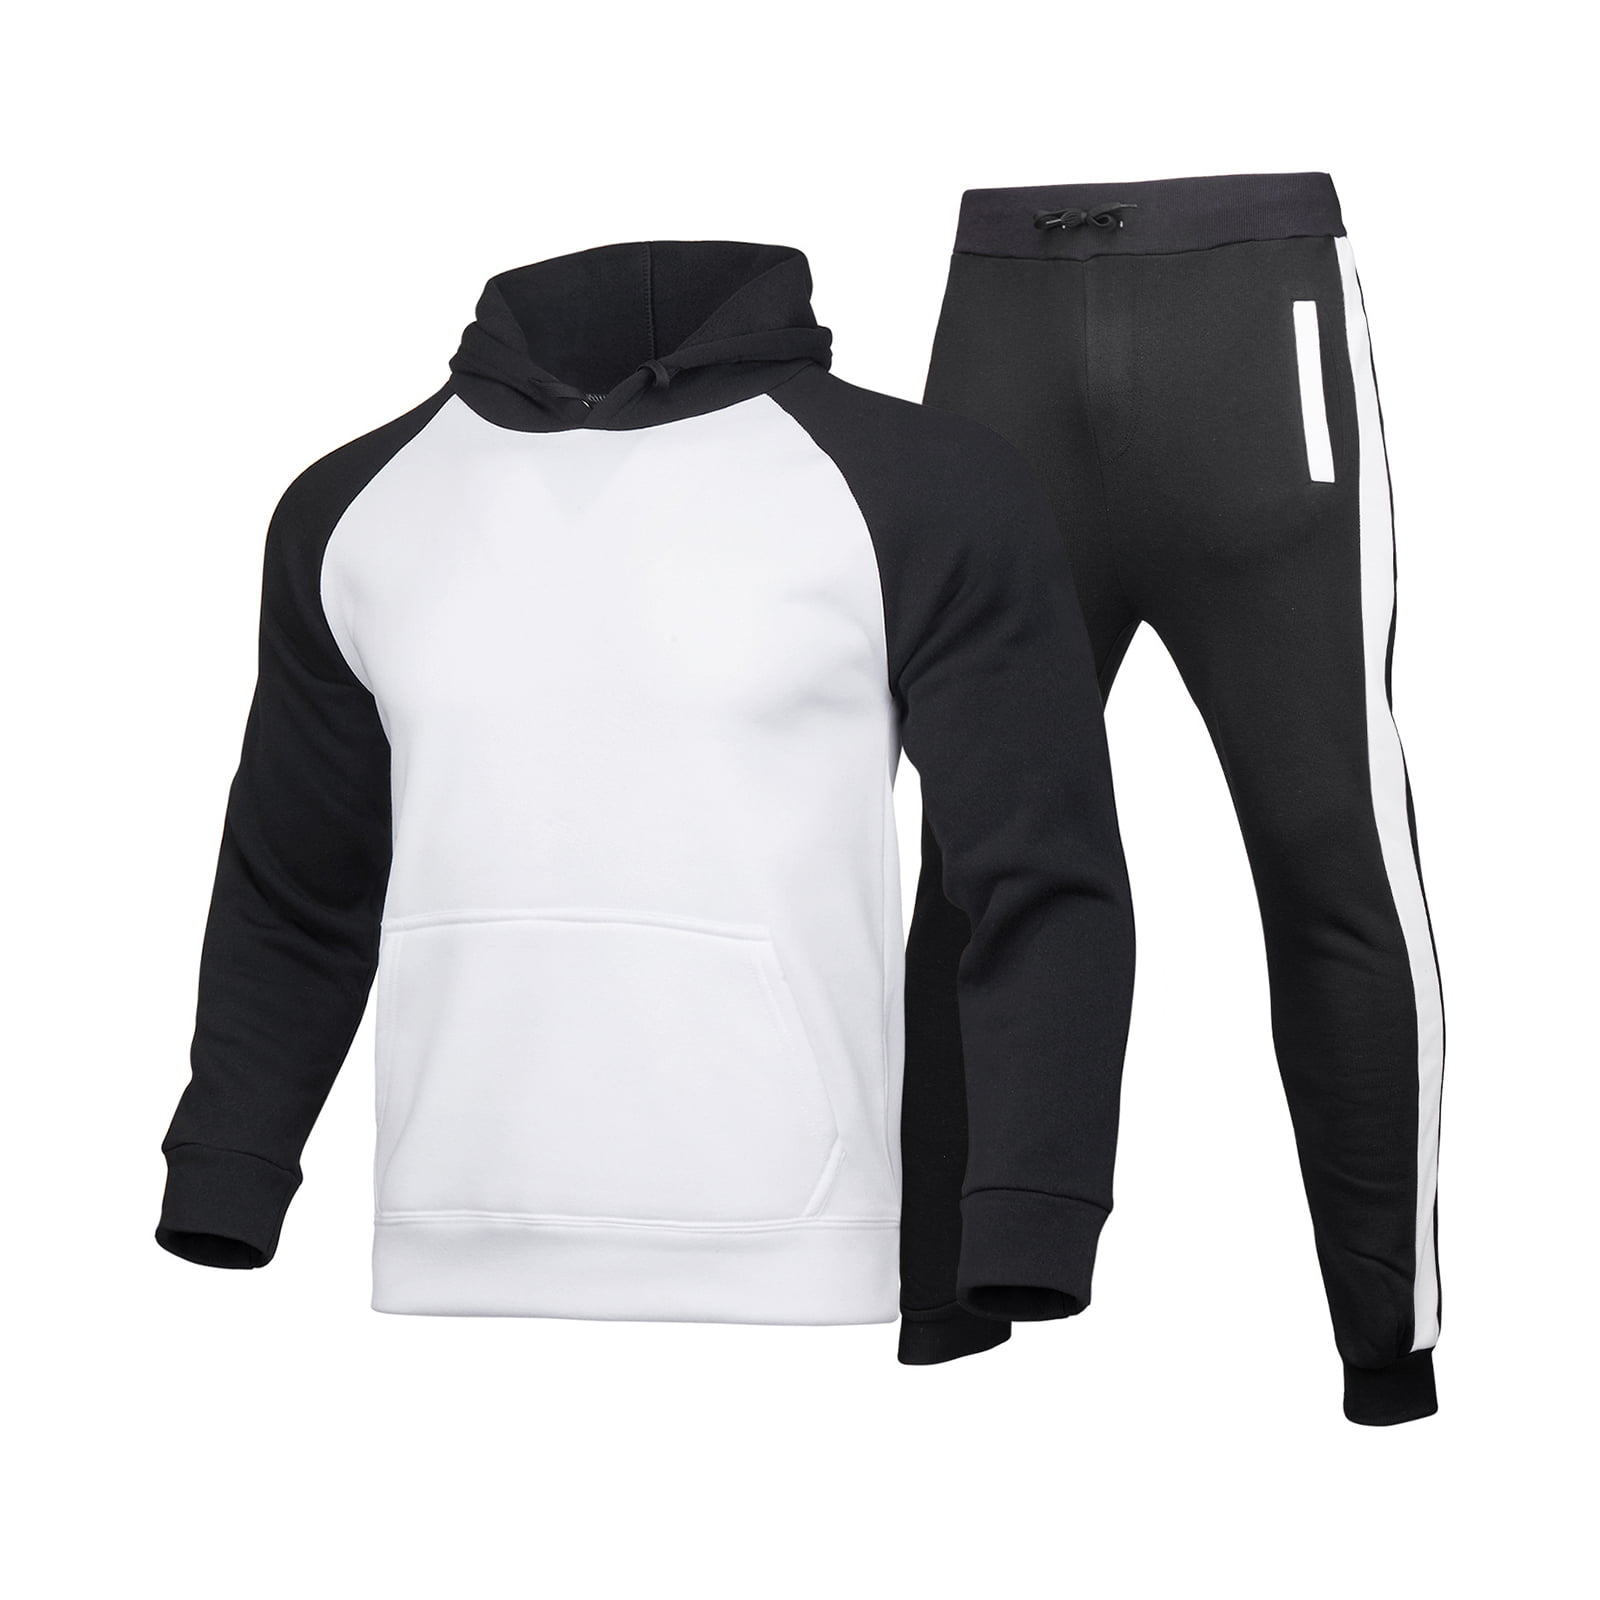 Men's Casual Running Working Out Jogging Gym Fitness Straight Leg Tracksuit Set 